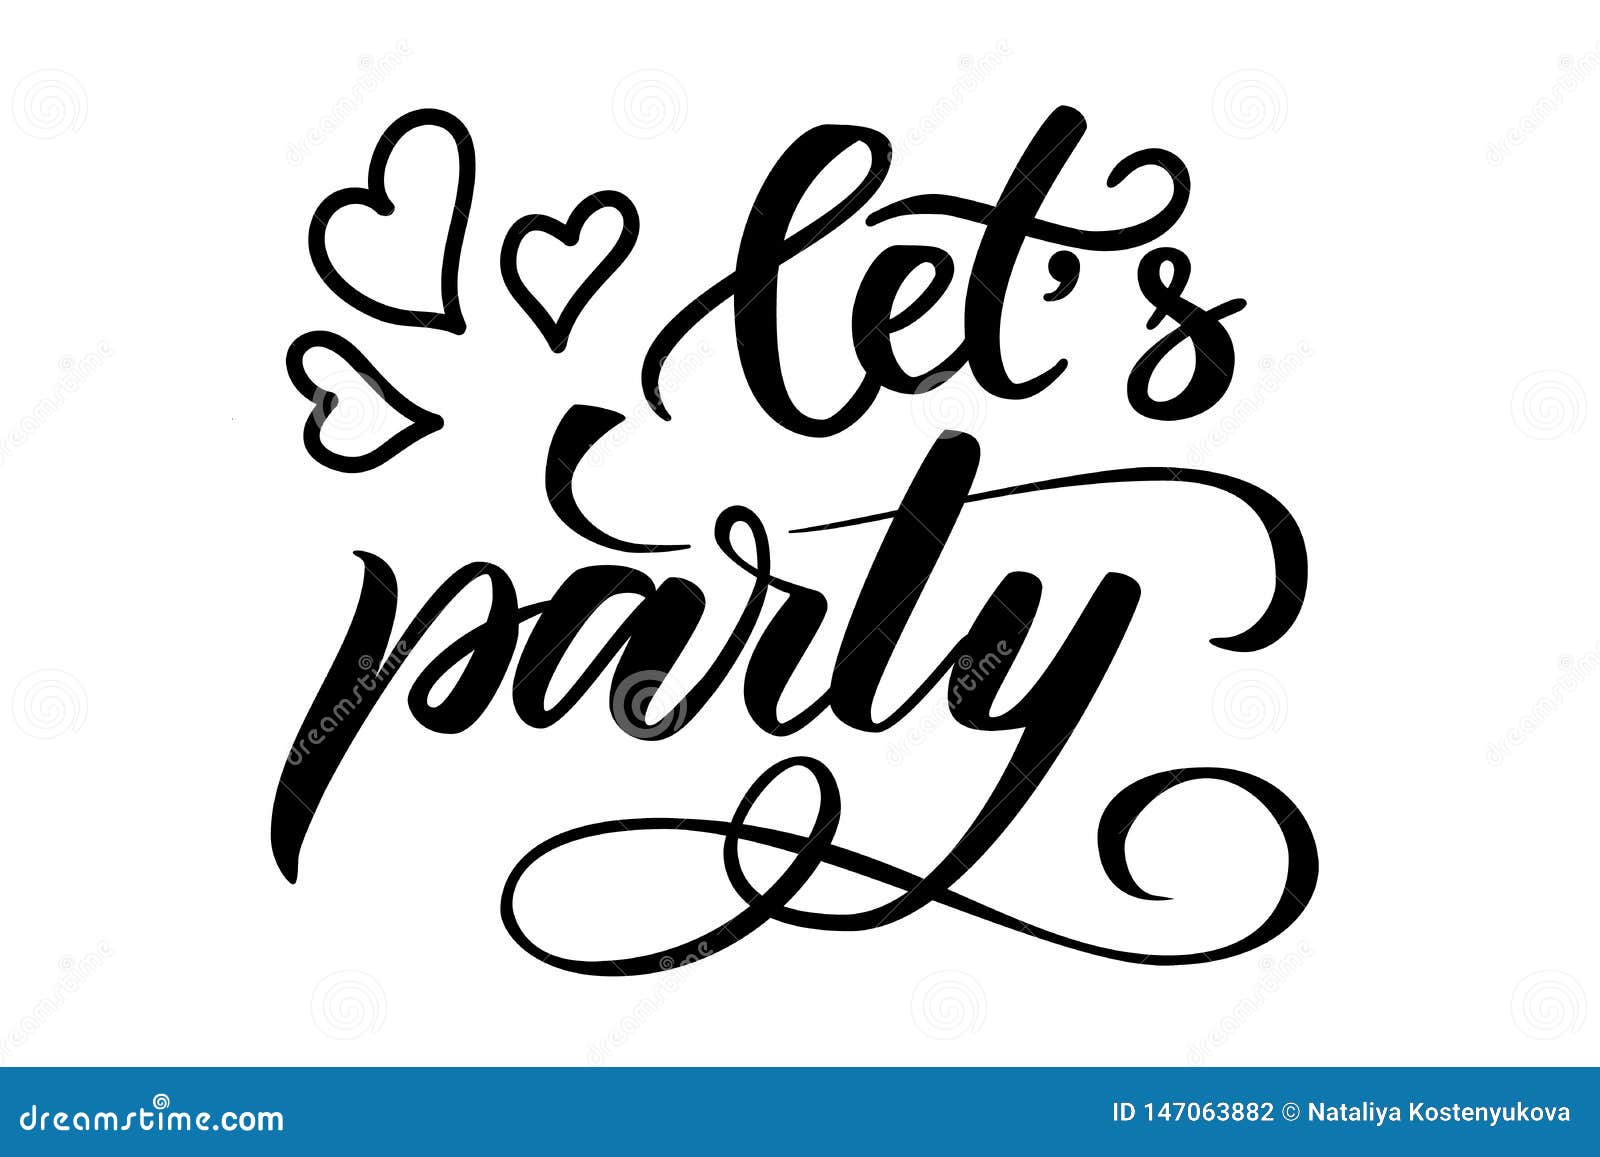 Handwritten Brush Calligraphy Lets Party Stock Vector - Illustration of ...